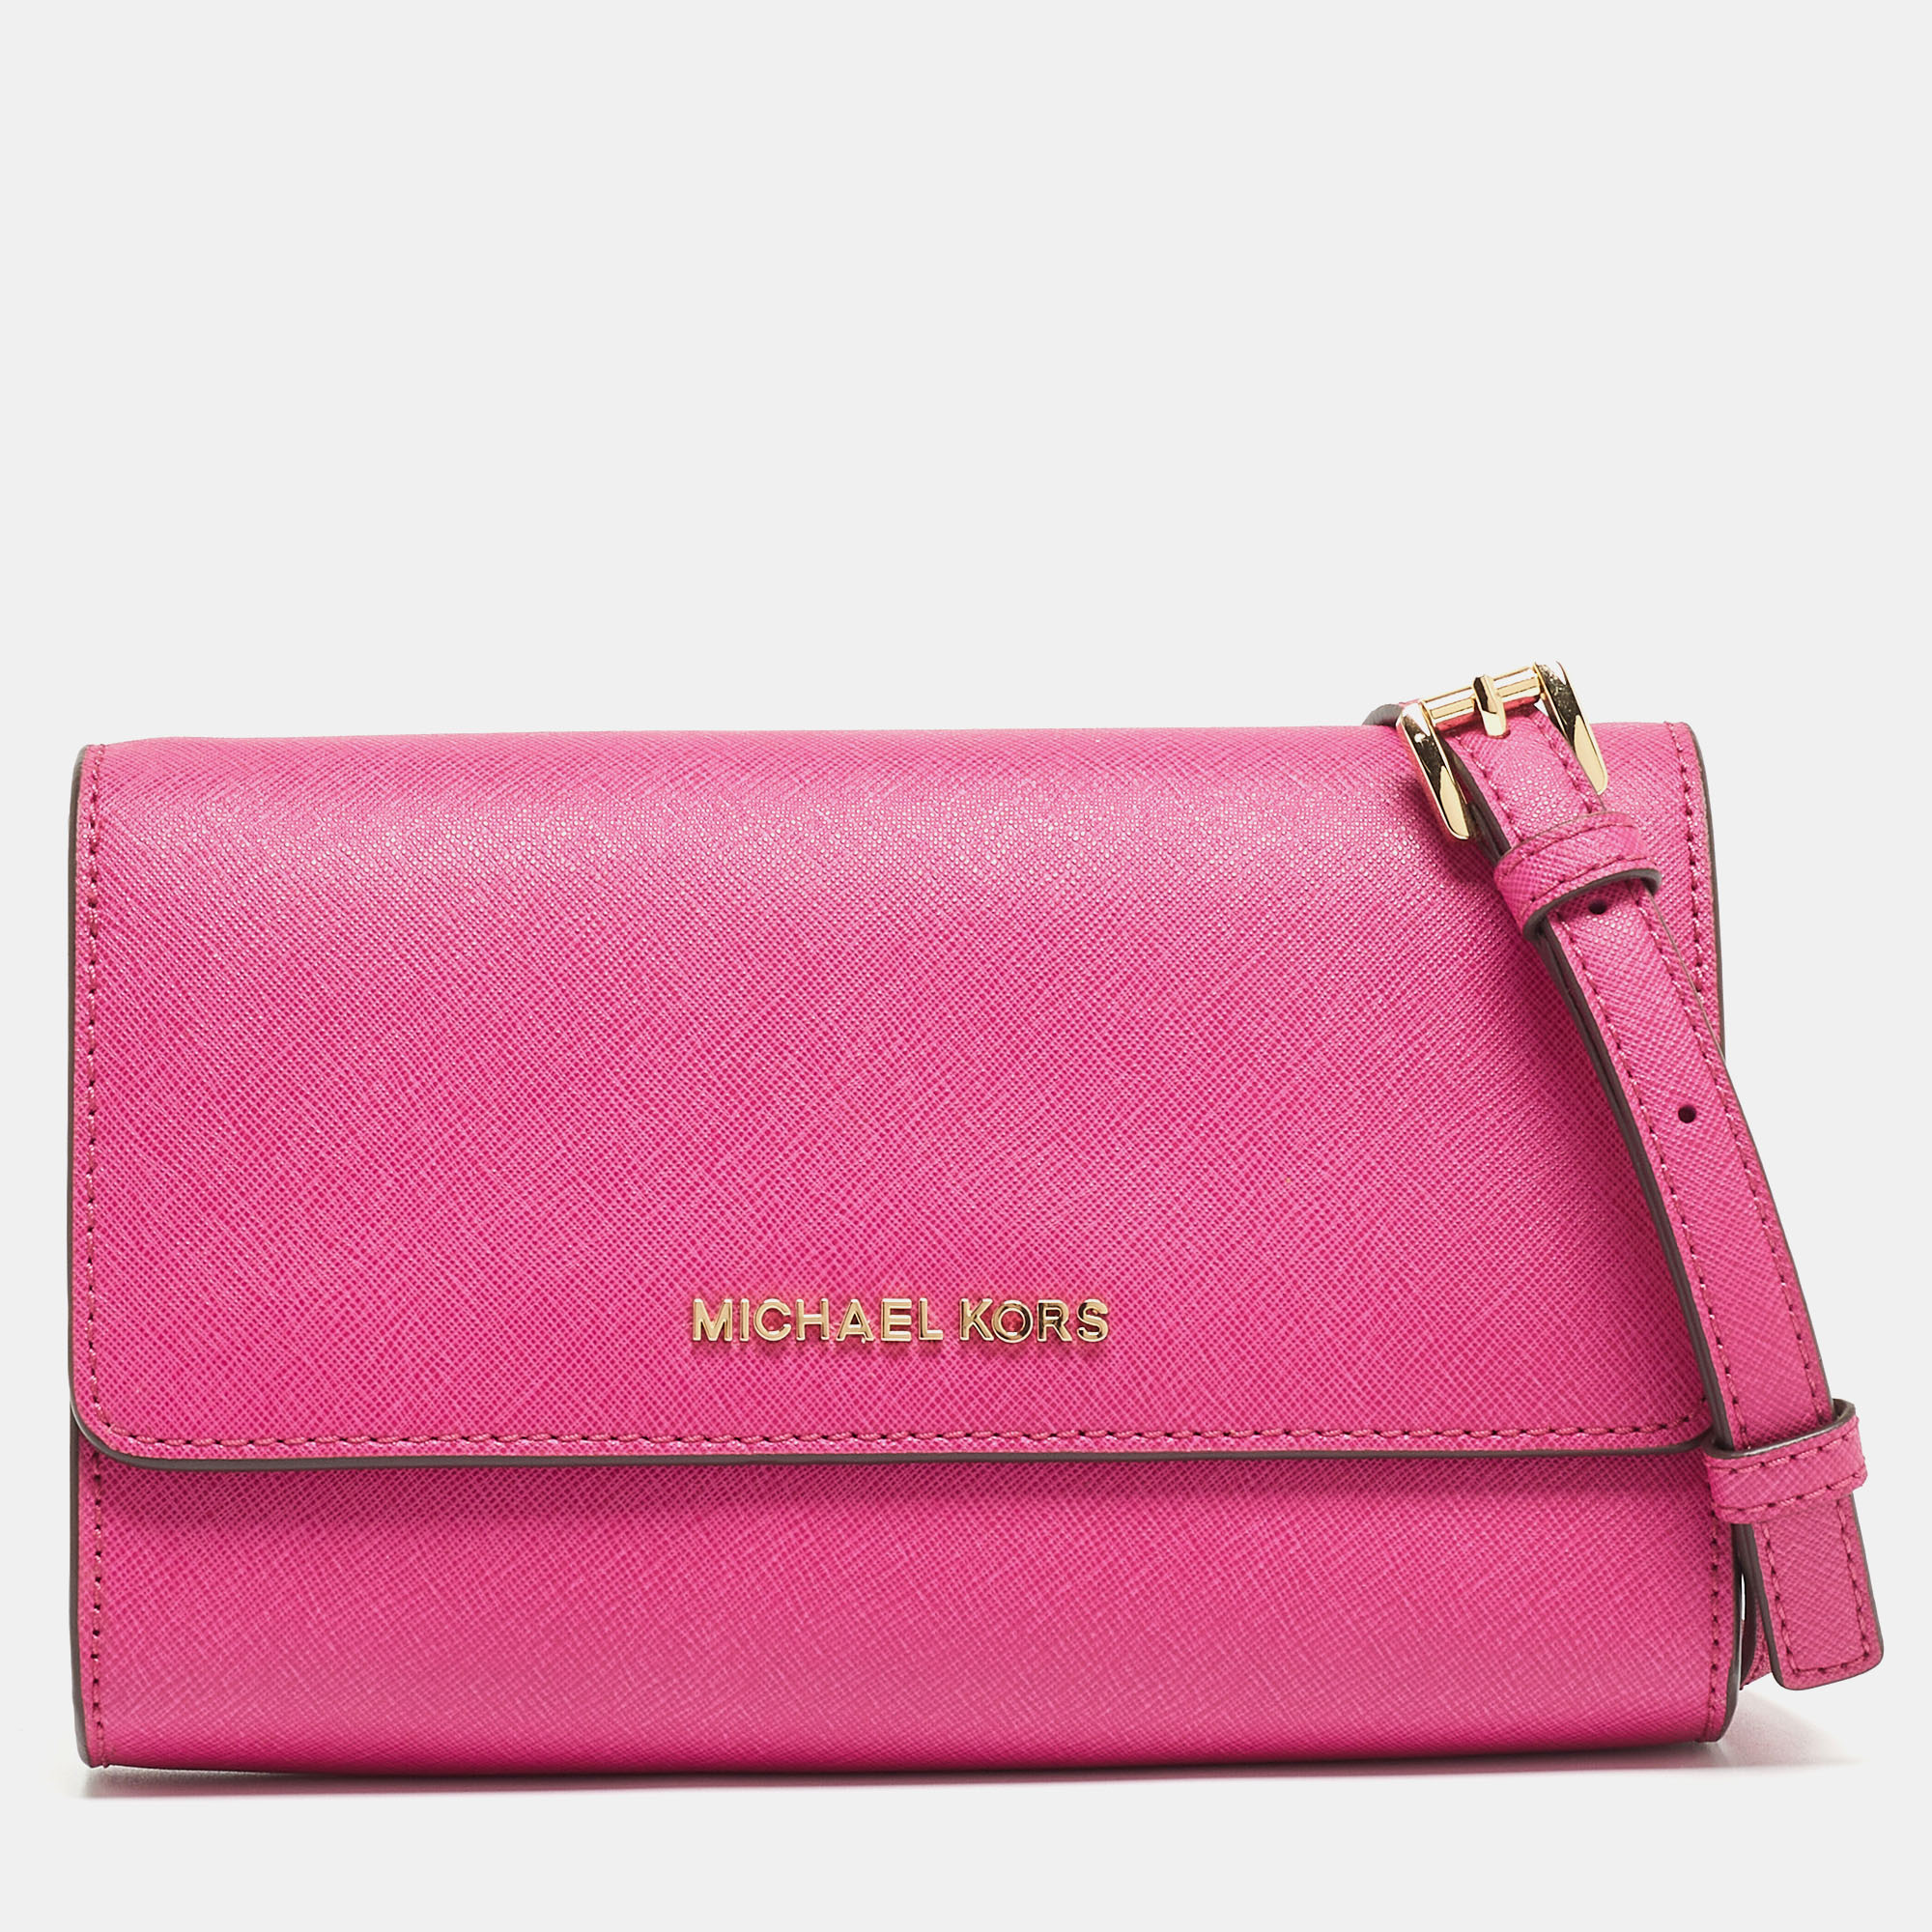 Michael Kors Pink Saffiano Leather Flap 3in1 Crossbody Bag